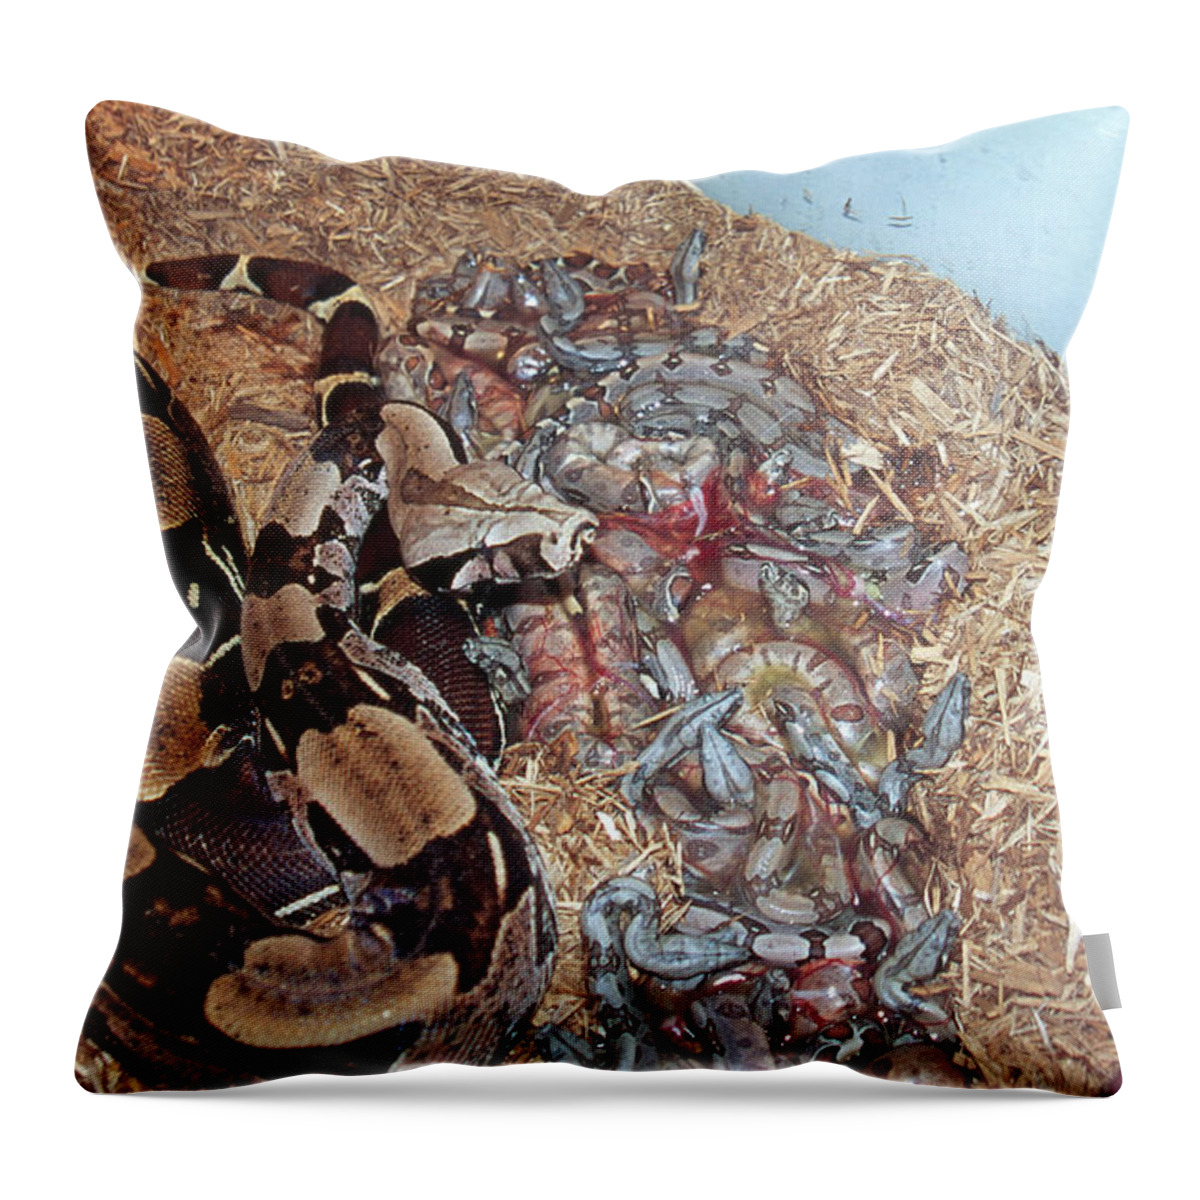 Adult And Young Throw Pillow featuring the photograph New Born Red-tail Boa Constrictors by Paul Whitten